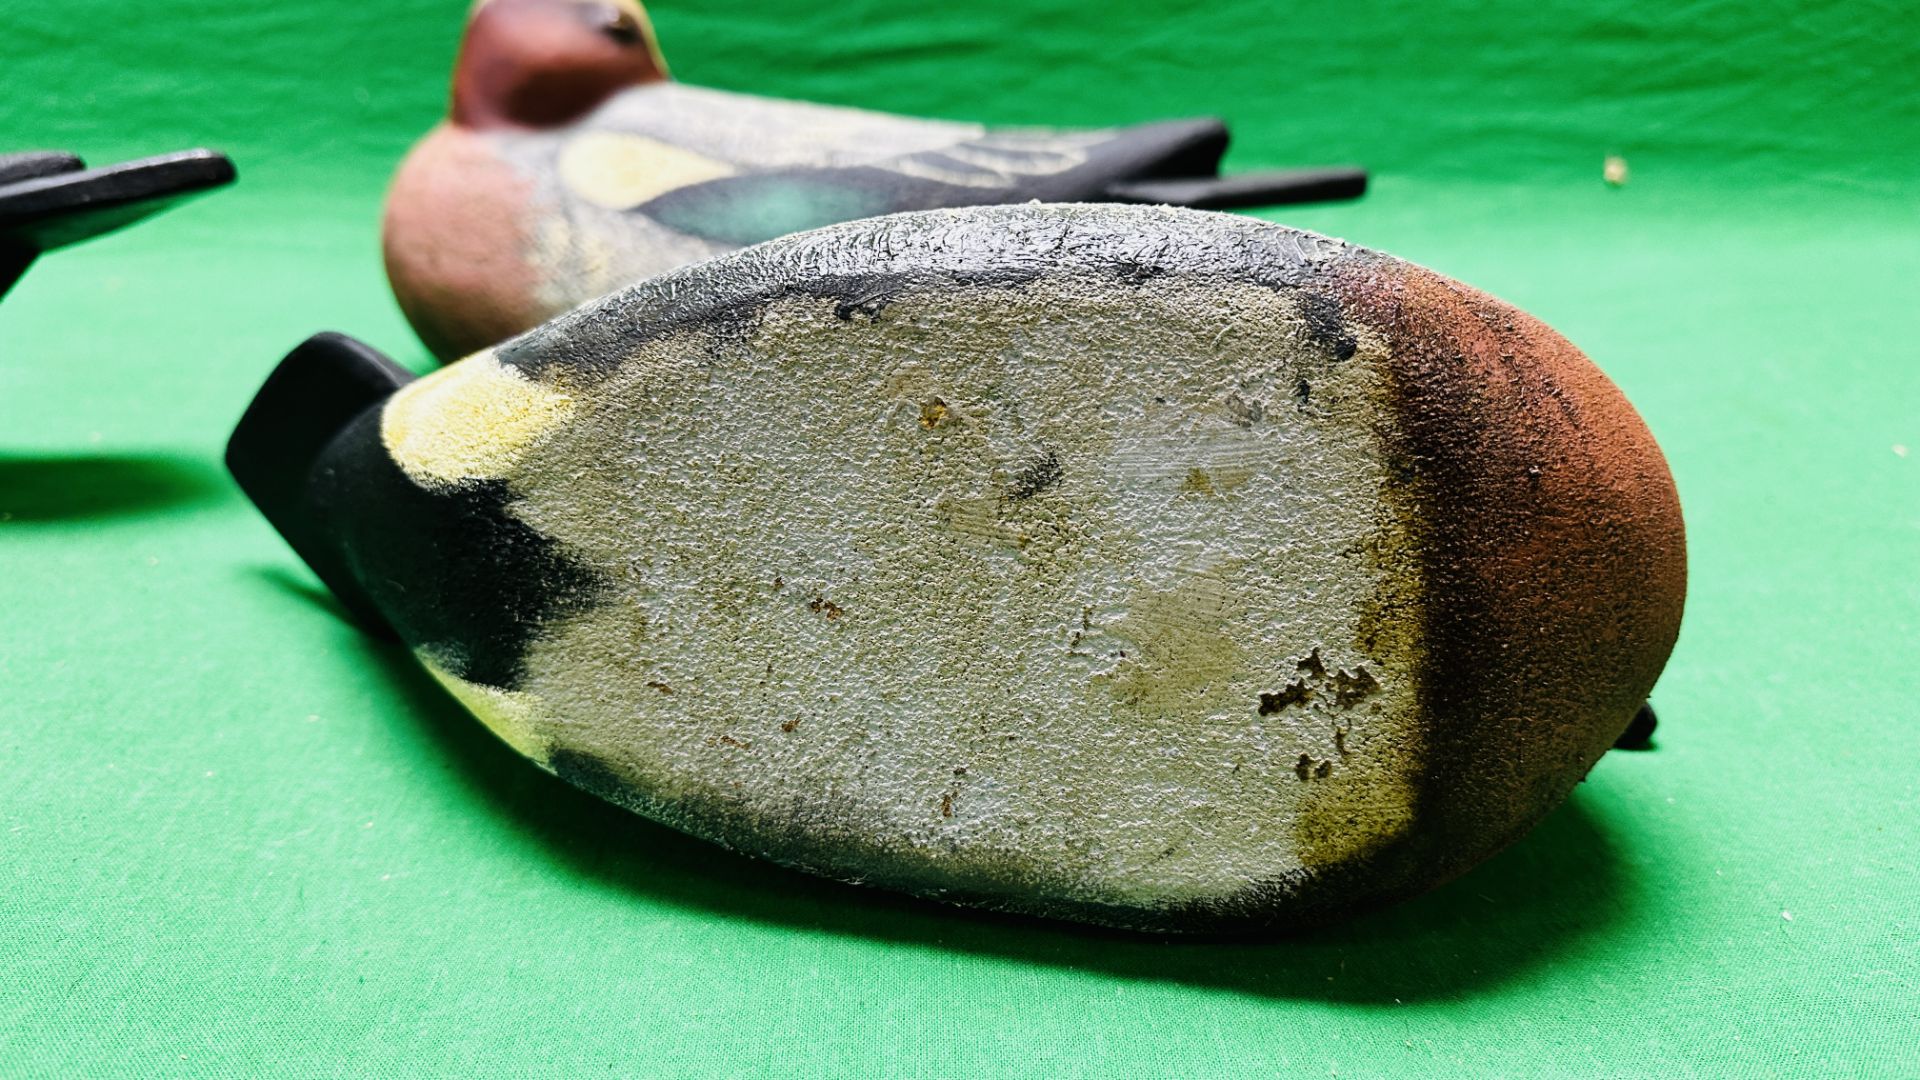 A HANDCRAFTED SET OF THREE DUCK DECOYS HAVING HANDPAINTED DETAIL AND GLASS EYES. - Image 8 of 8